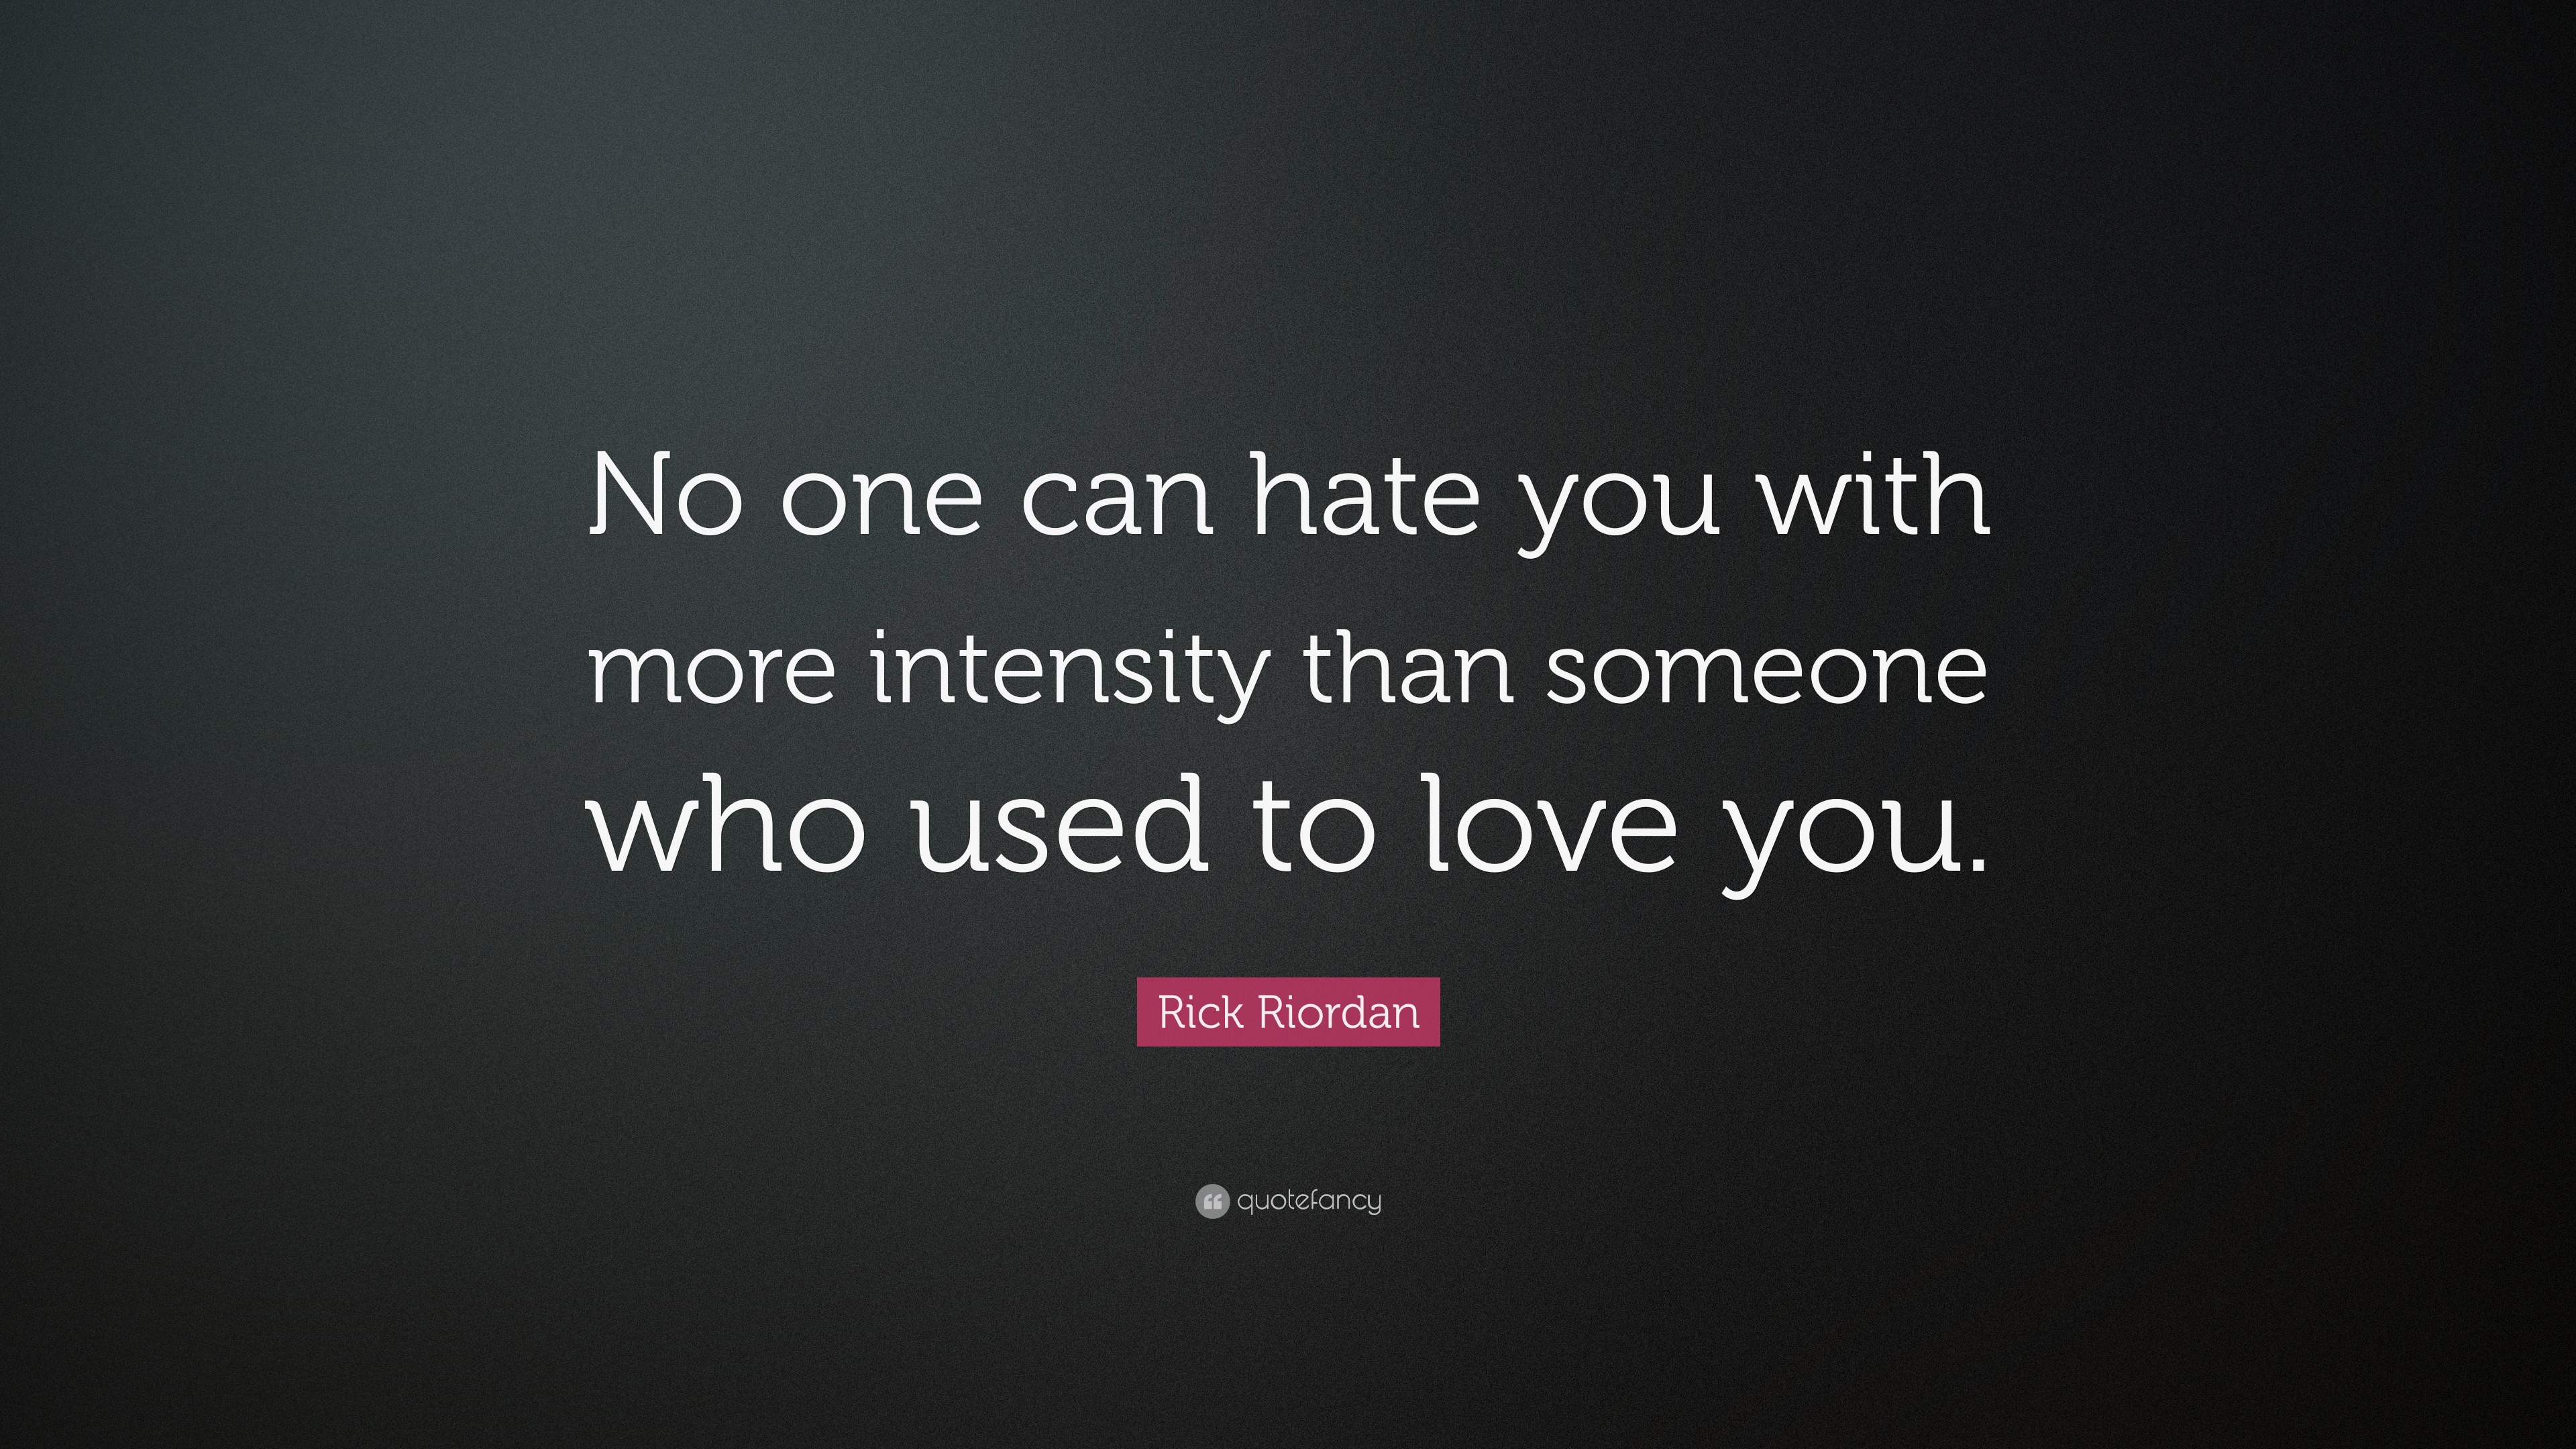 Rick Riordan Quote “No one can hate you with more intensity than someone who